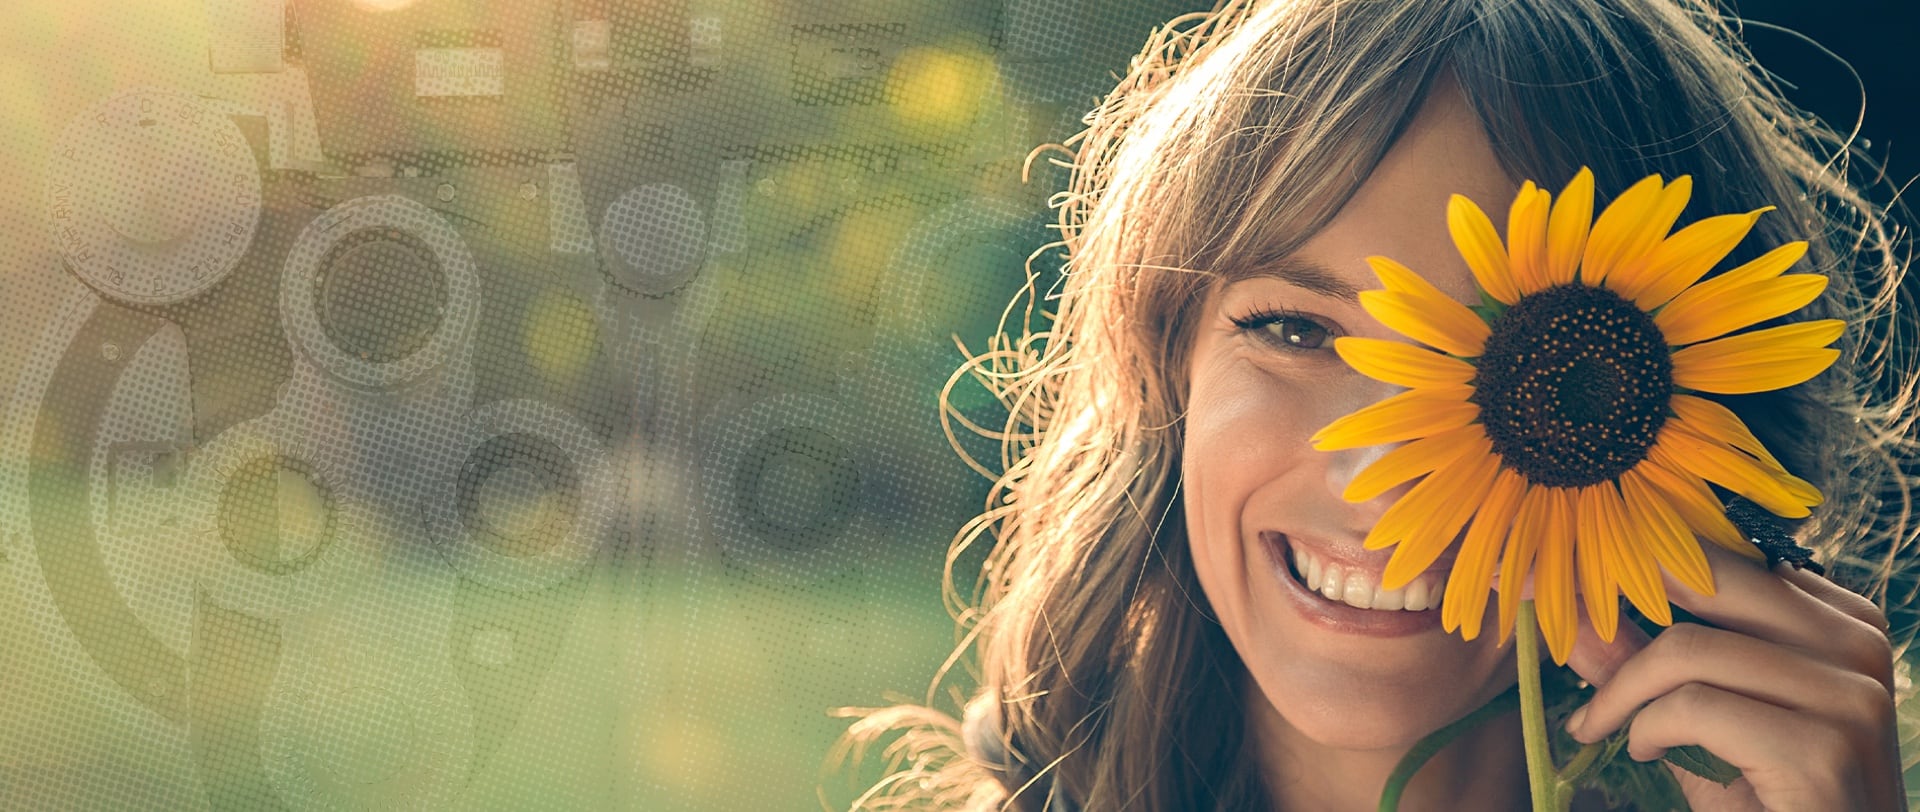 Orillia Optometry woman smiling with sunflower